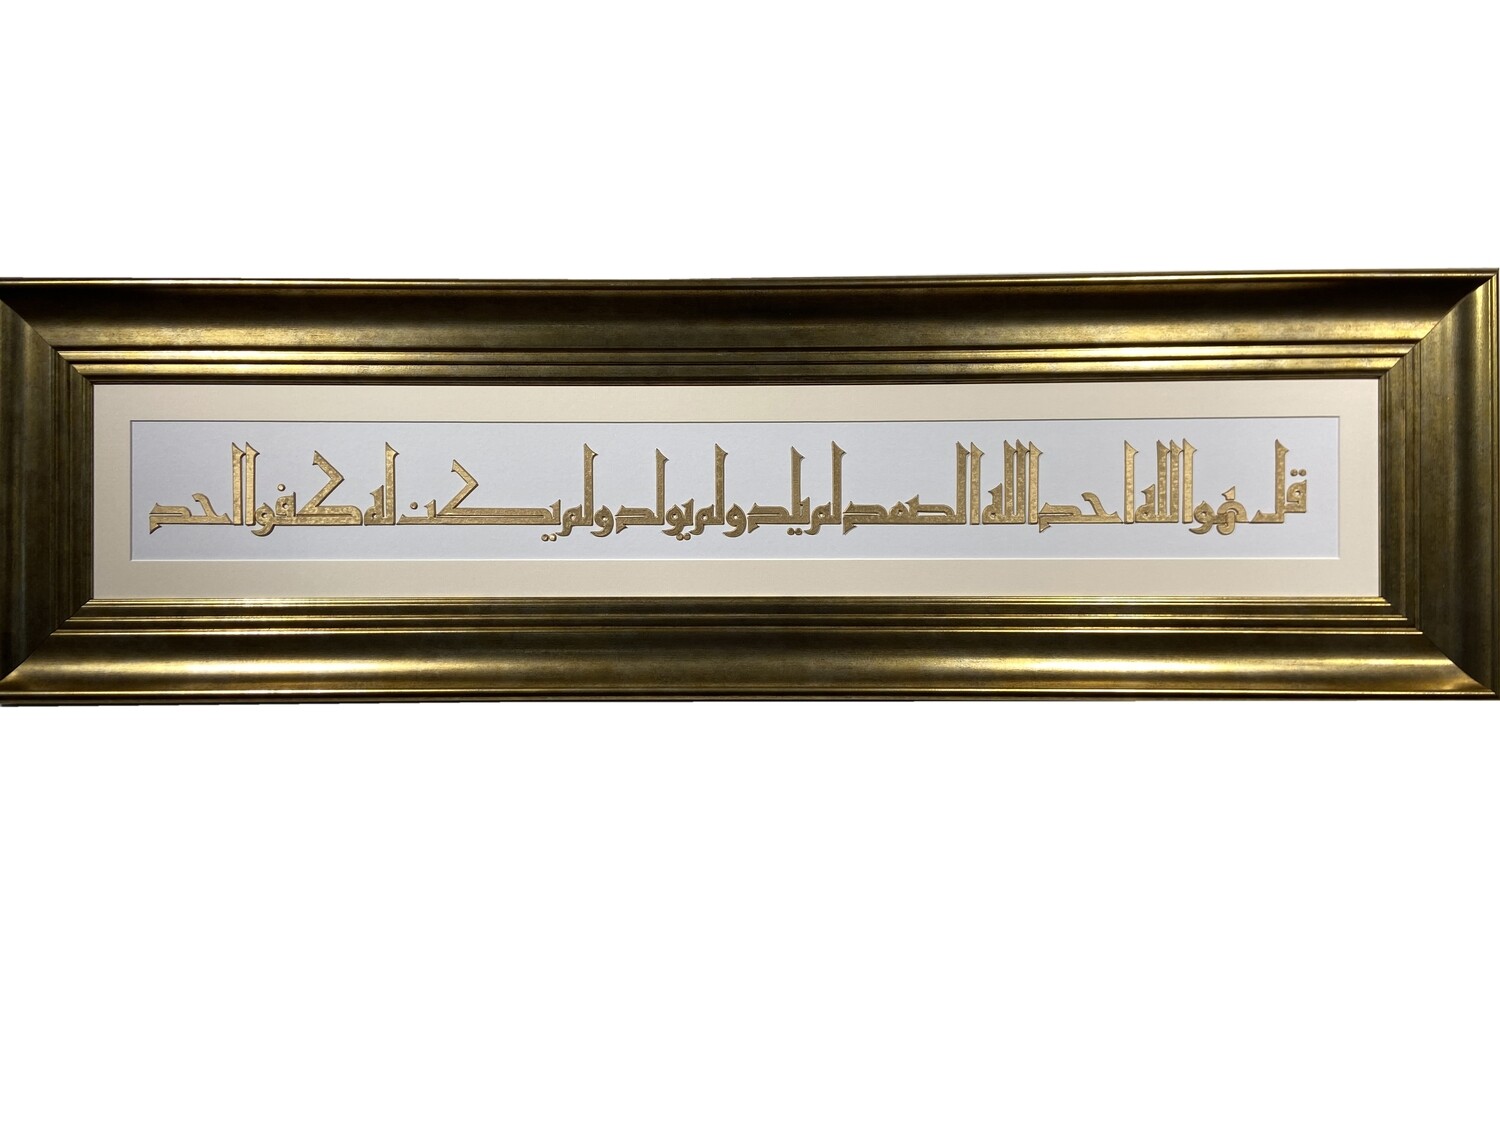 Surah Ikhlaas Bas Relief Fatimid Kufic Calligraphy Gold Frame